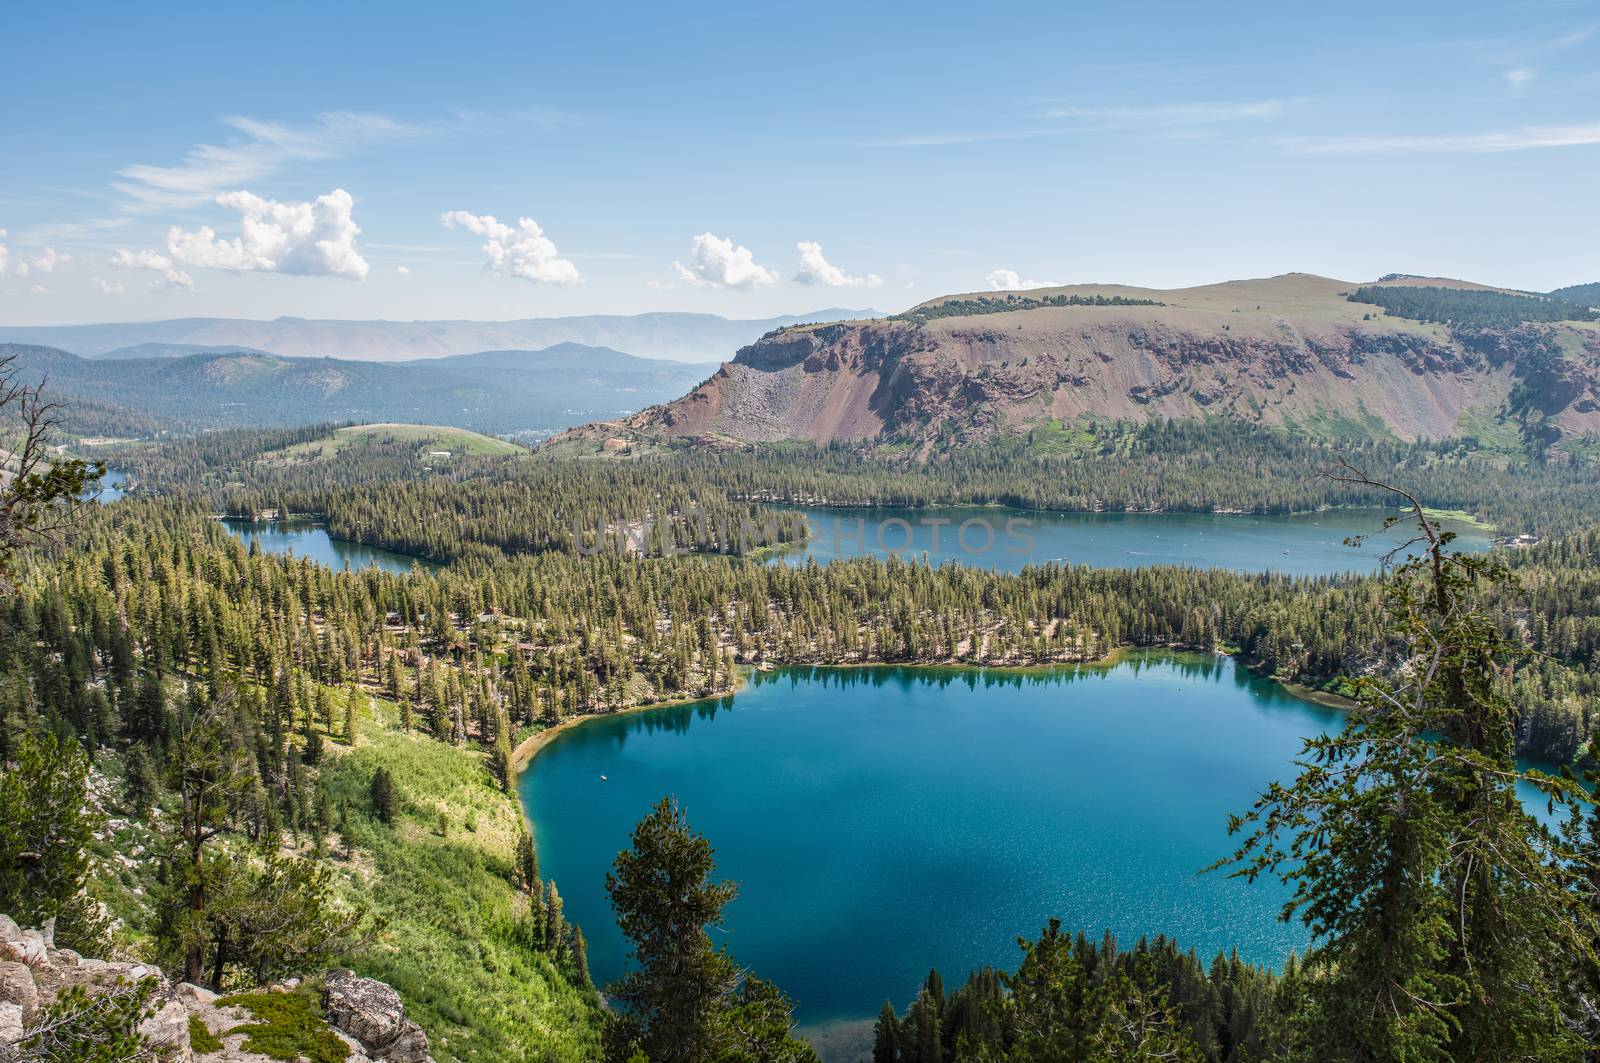 Overlooking Lake Mamie, Mary, and George with Twin Lakes in the distance, Mammoth Lakes, California by Njean